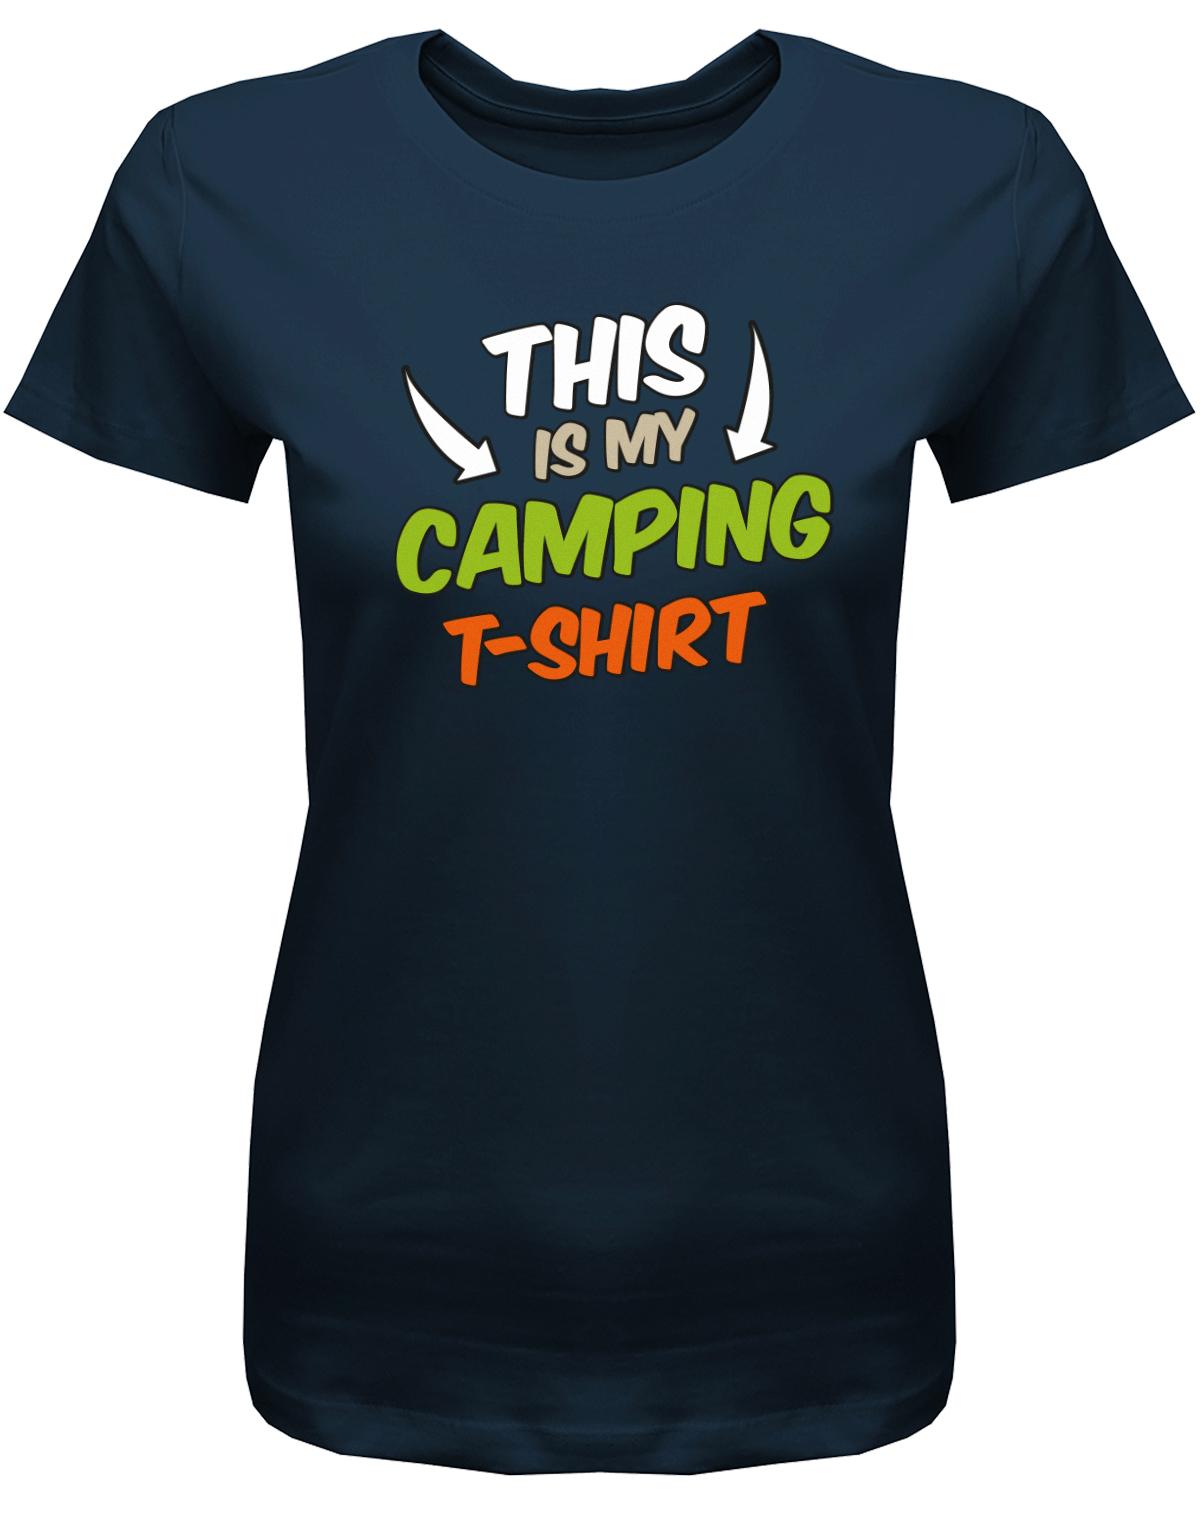 This-is-my-Camping-T-Shirt-Damen-Navy